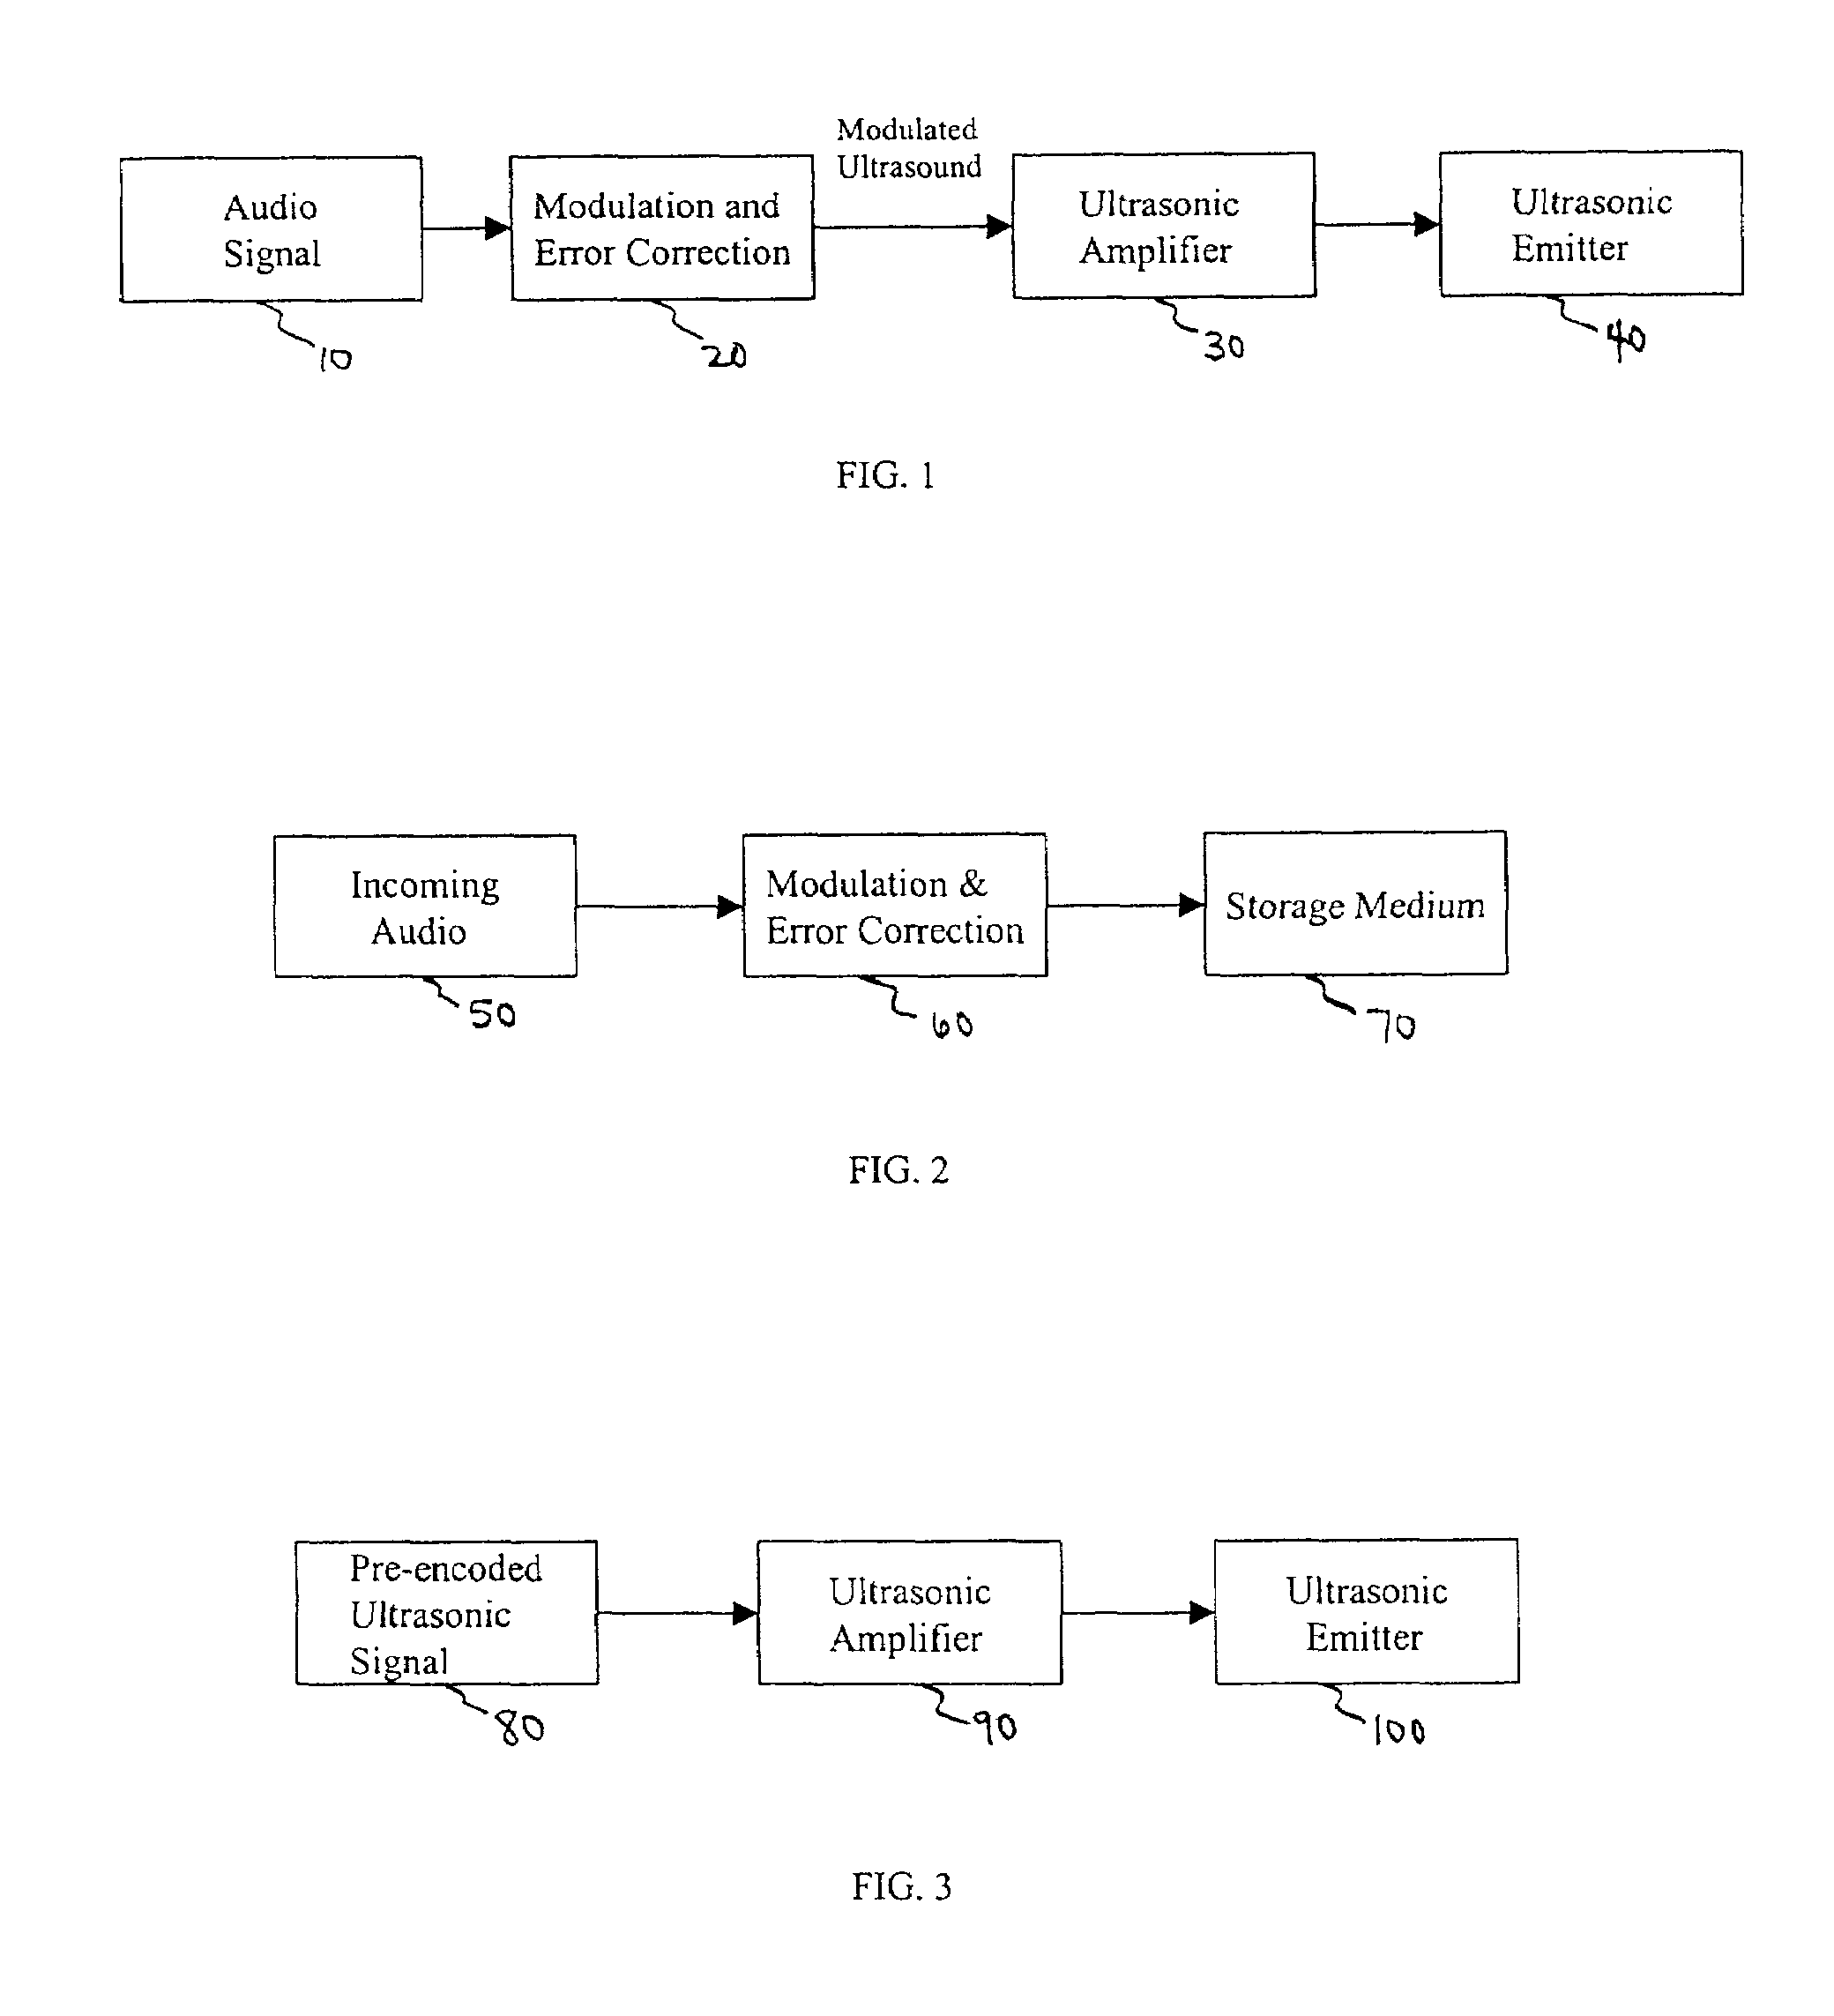 System for playback of pre-encoded signals through a parametric loudspeaker system